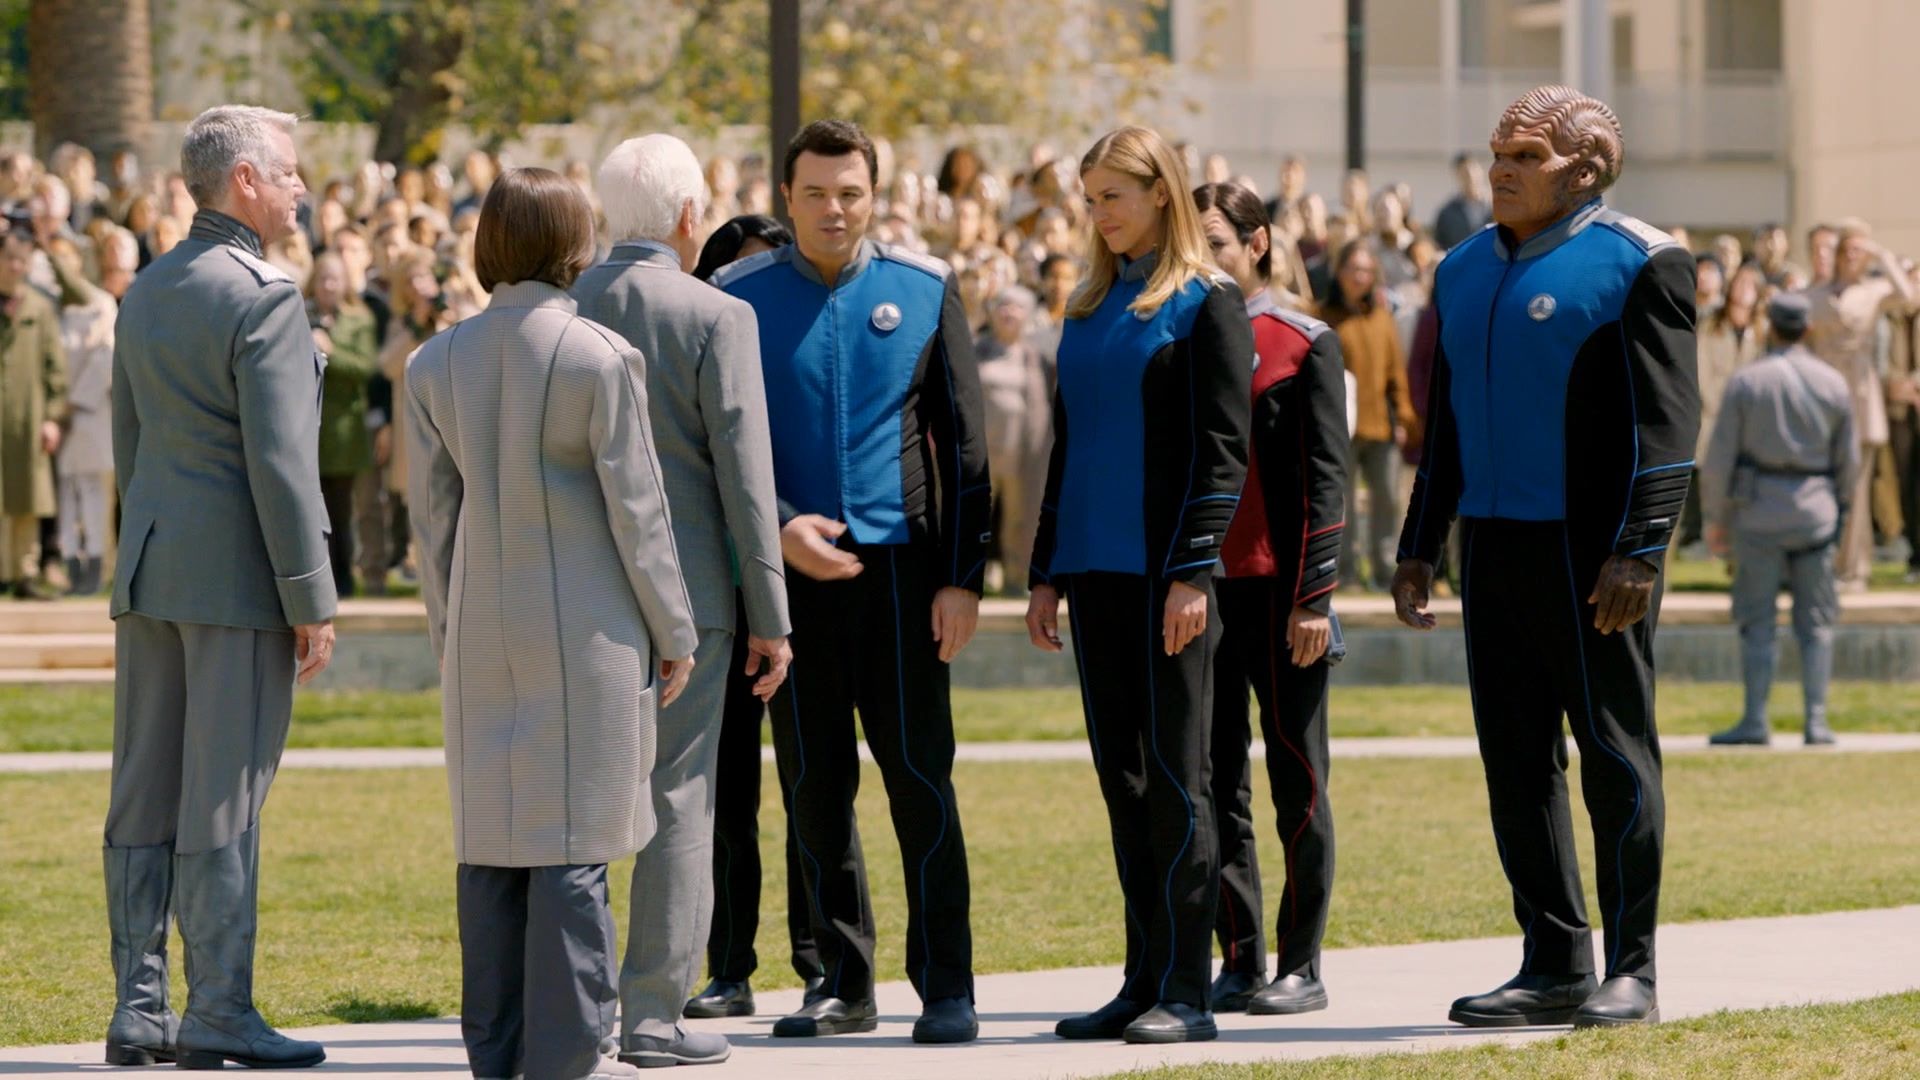 The_Orville_S02E05_All_the_World_is_Birthday_Cake_1080p_AMZN_WEB-DL_DDP5_1_H_264-NTb_0442.jpg